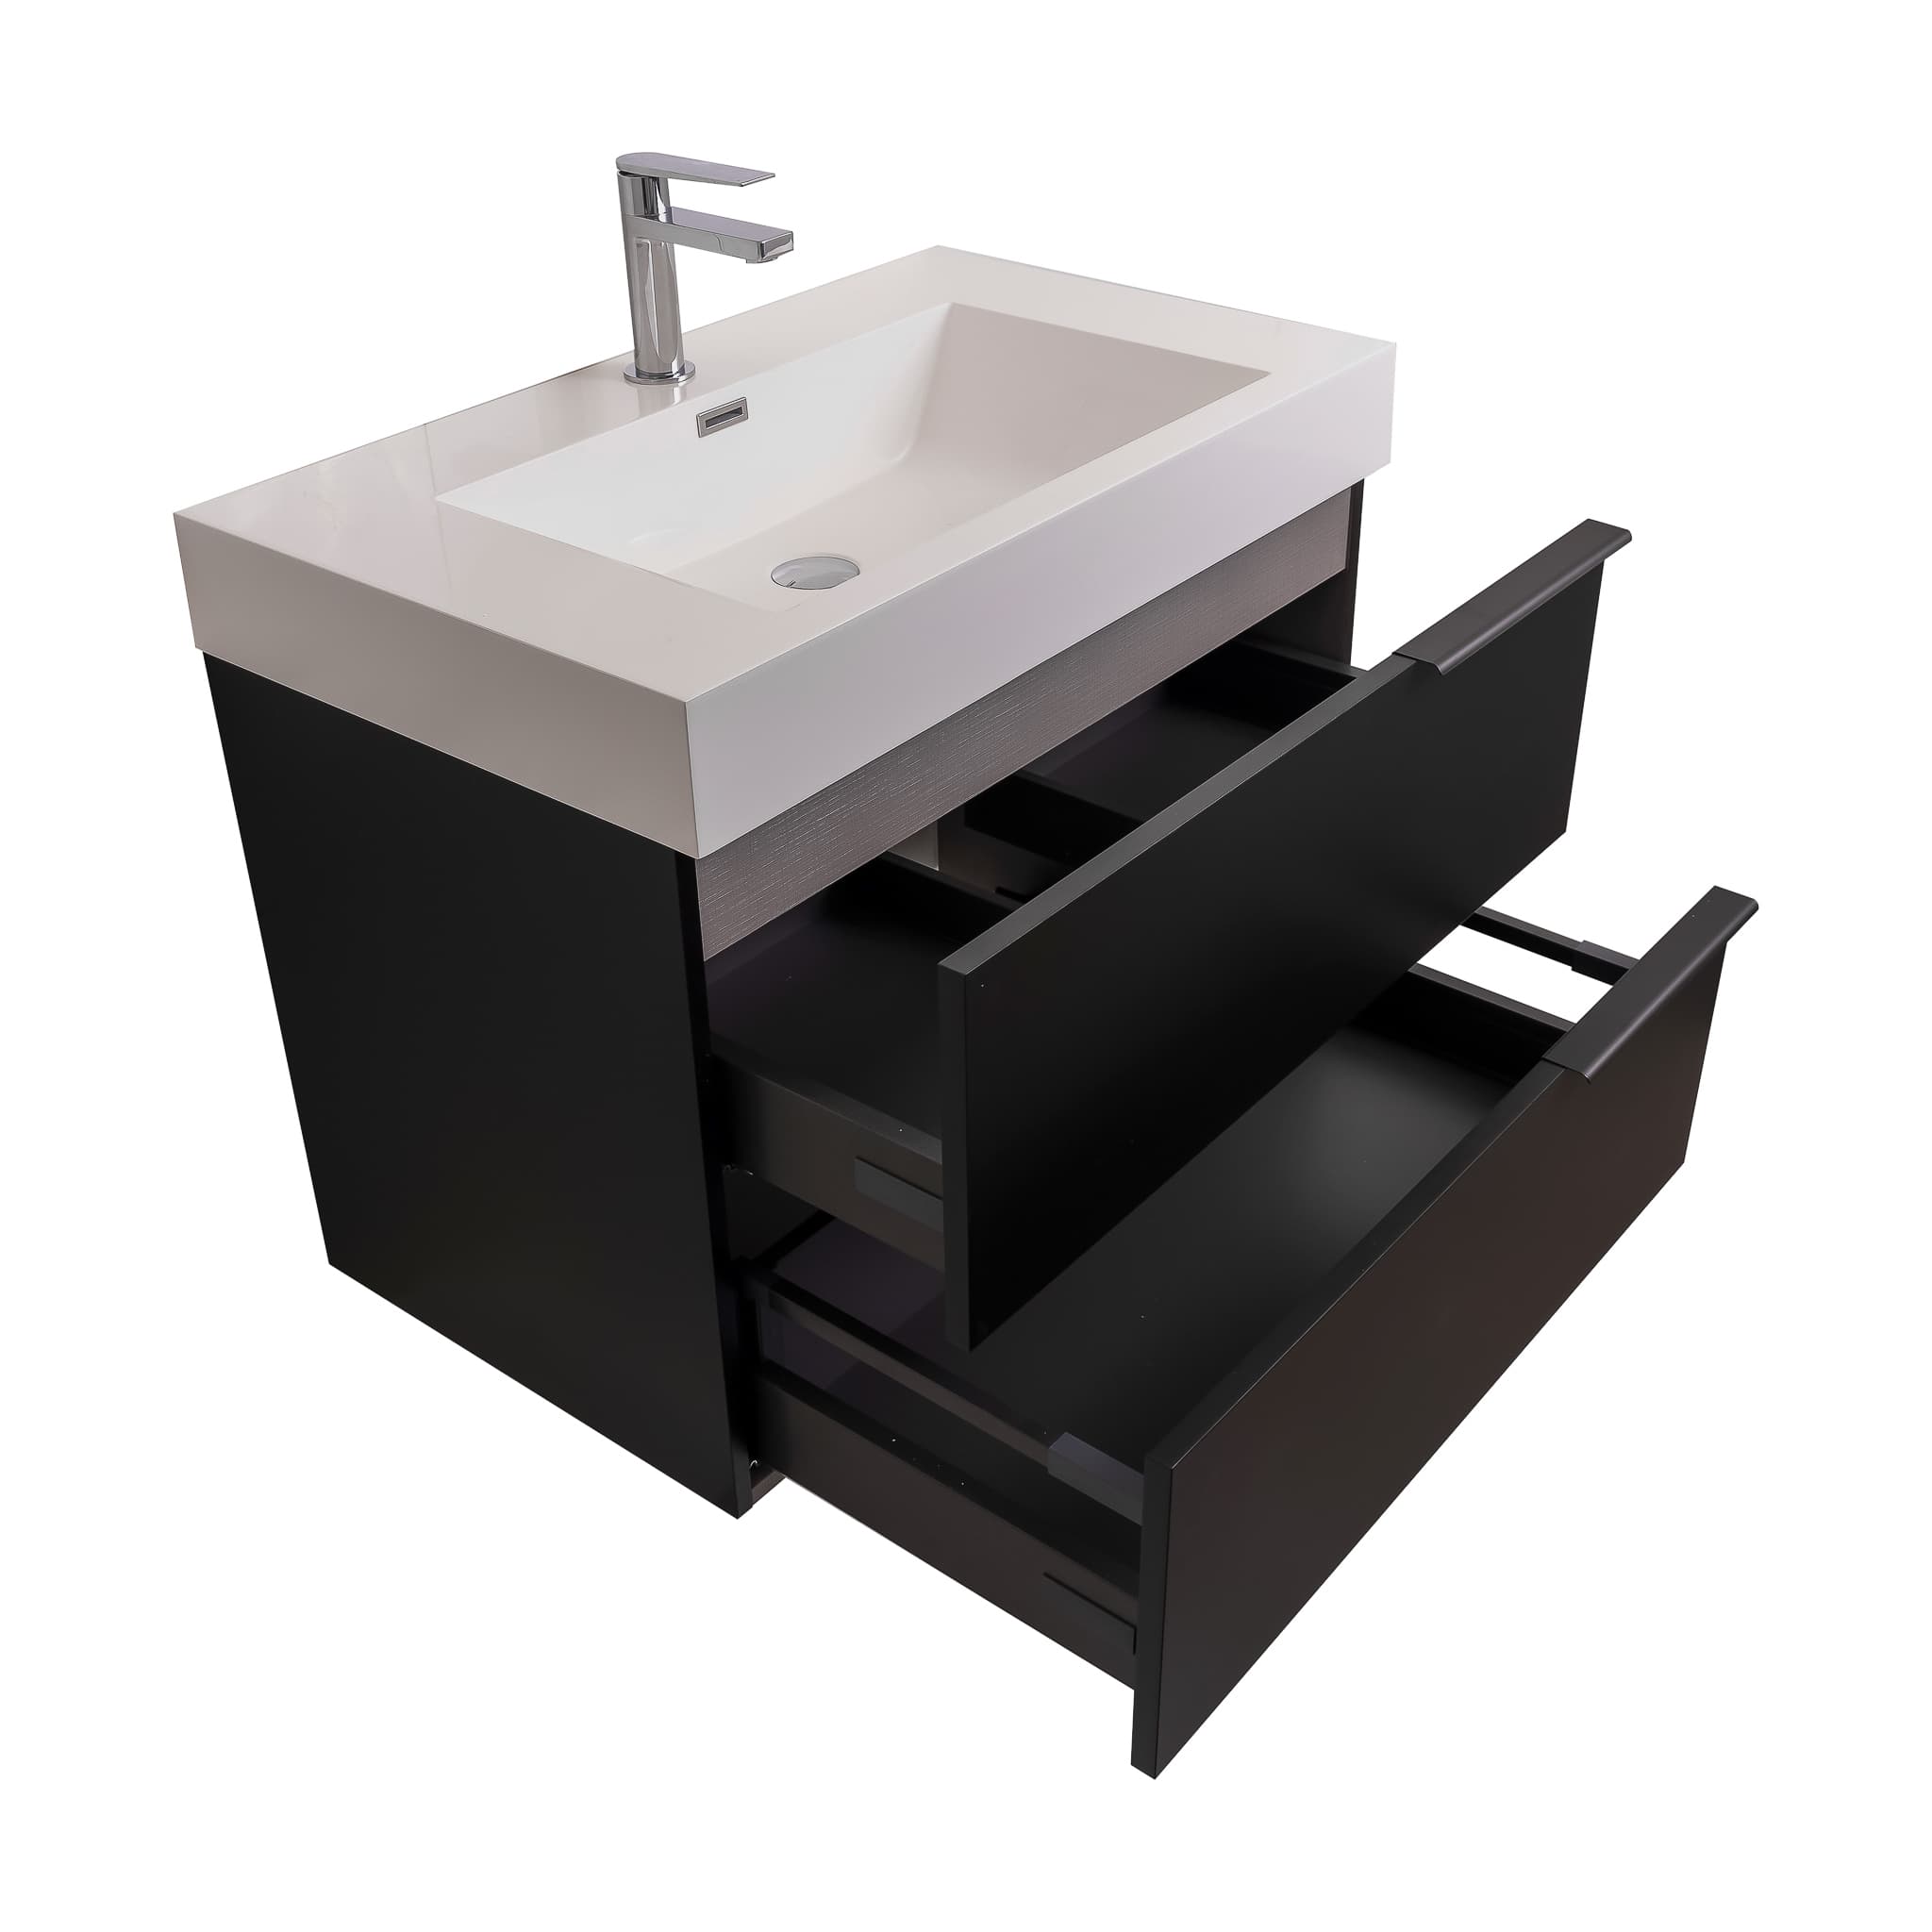 Mallorca 31.5 Matte Black Cabinet, Square Cultured Marble Sink, Wall Mounted Modern Vanity Set